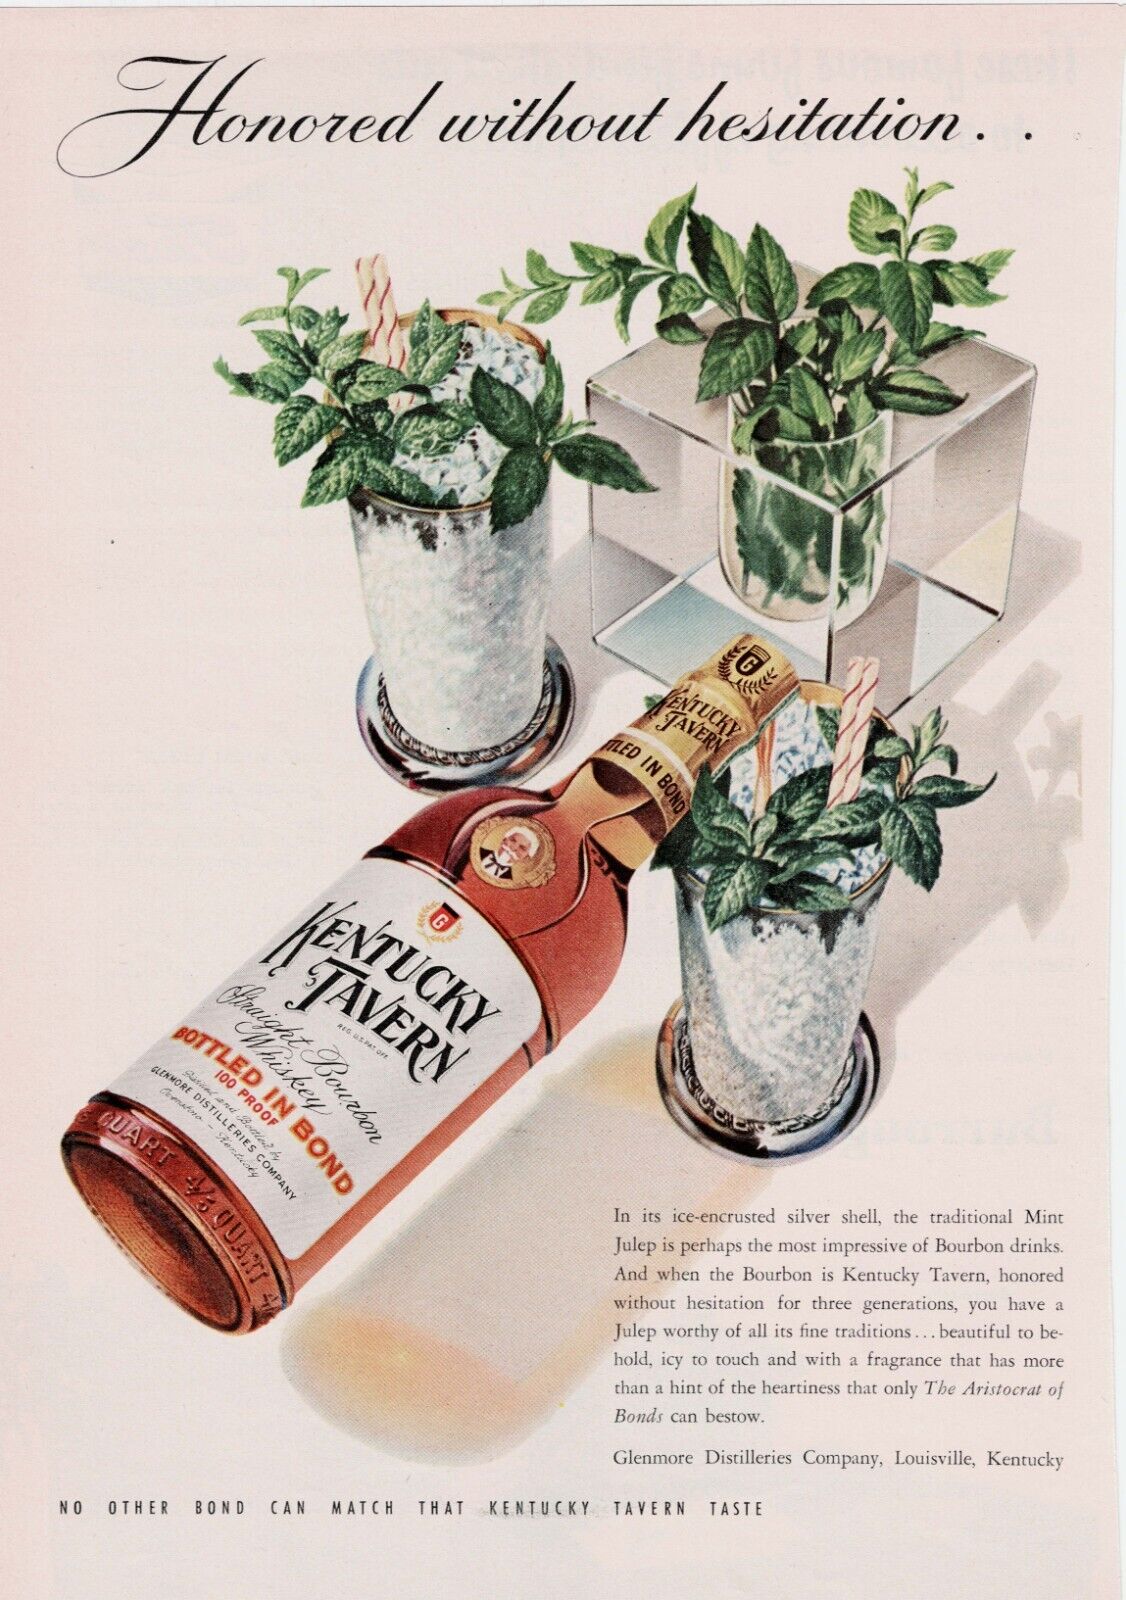 Vintage ad for Kentucky Tavern bourbon showcasing a decorative punchbowl and bottle. Likely Illustrated by John C Howard.